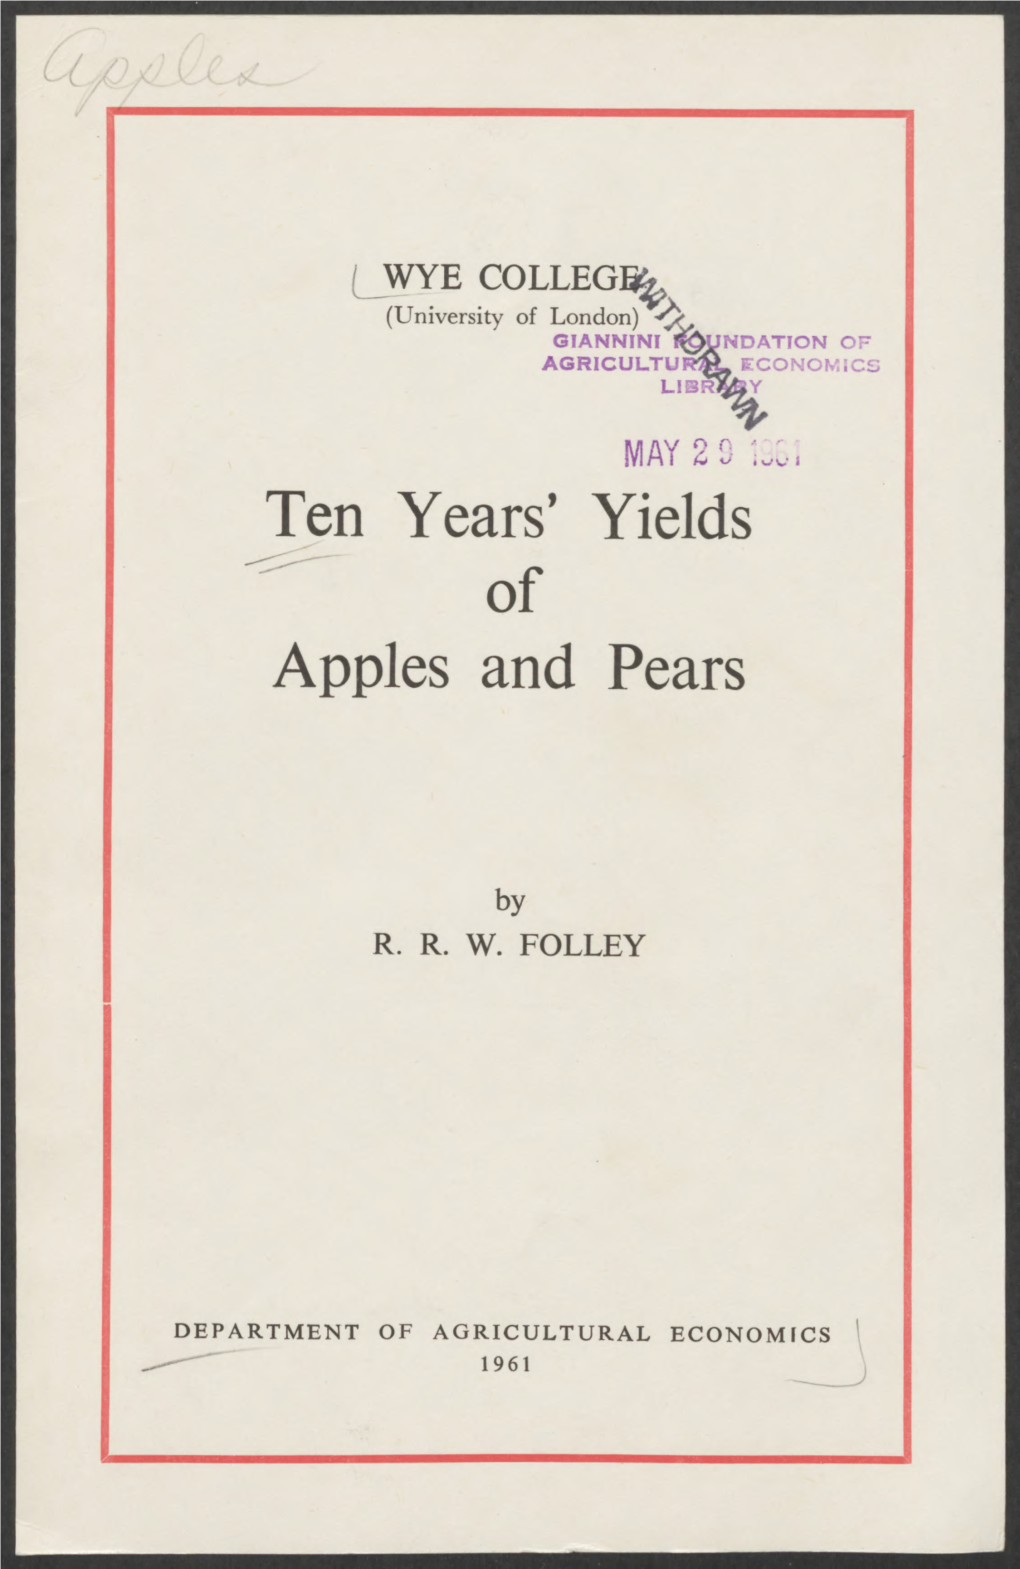 Ten Years' Yields of Apples and Pears